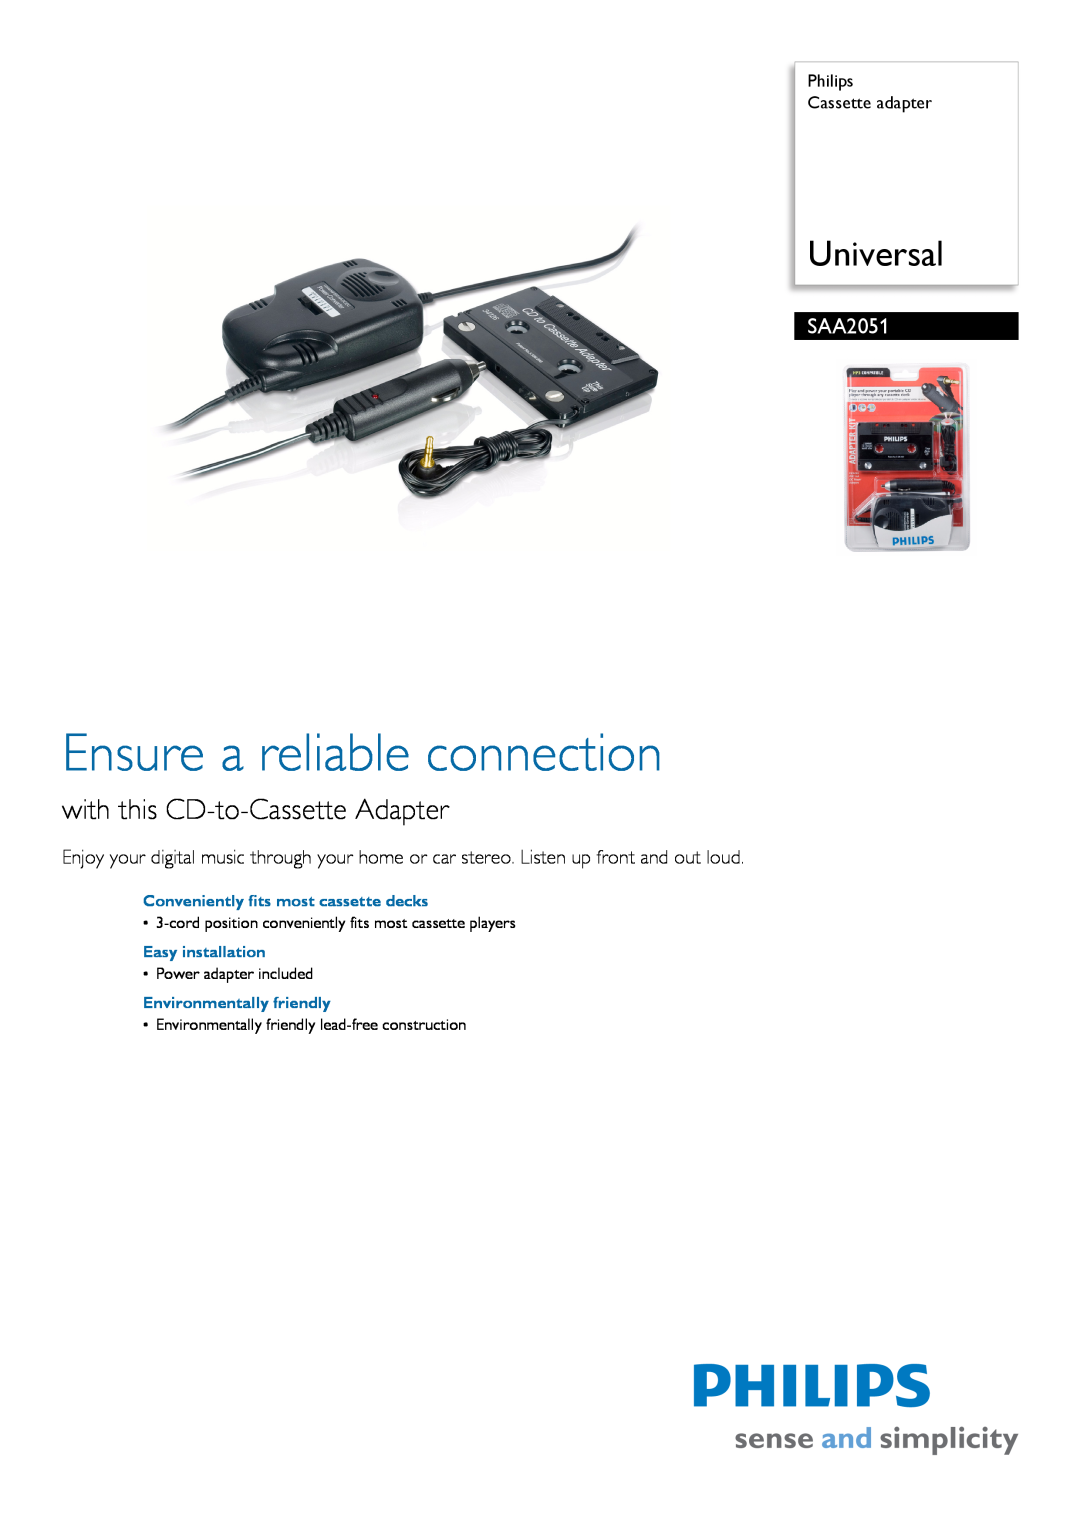 Philips SAA2051 manual Philips Cassette adapter, Conveniently fits most cassette decks, Easy installation, Universal 